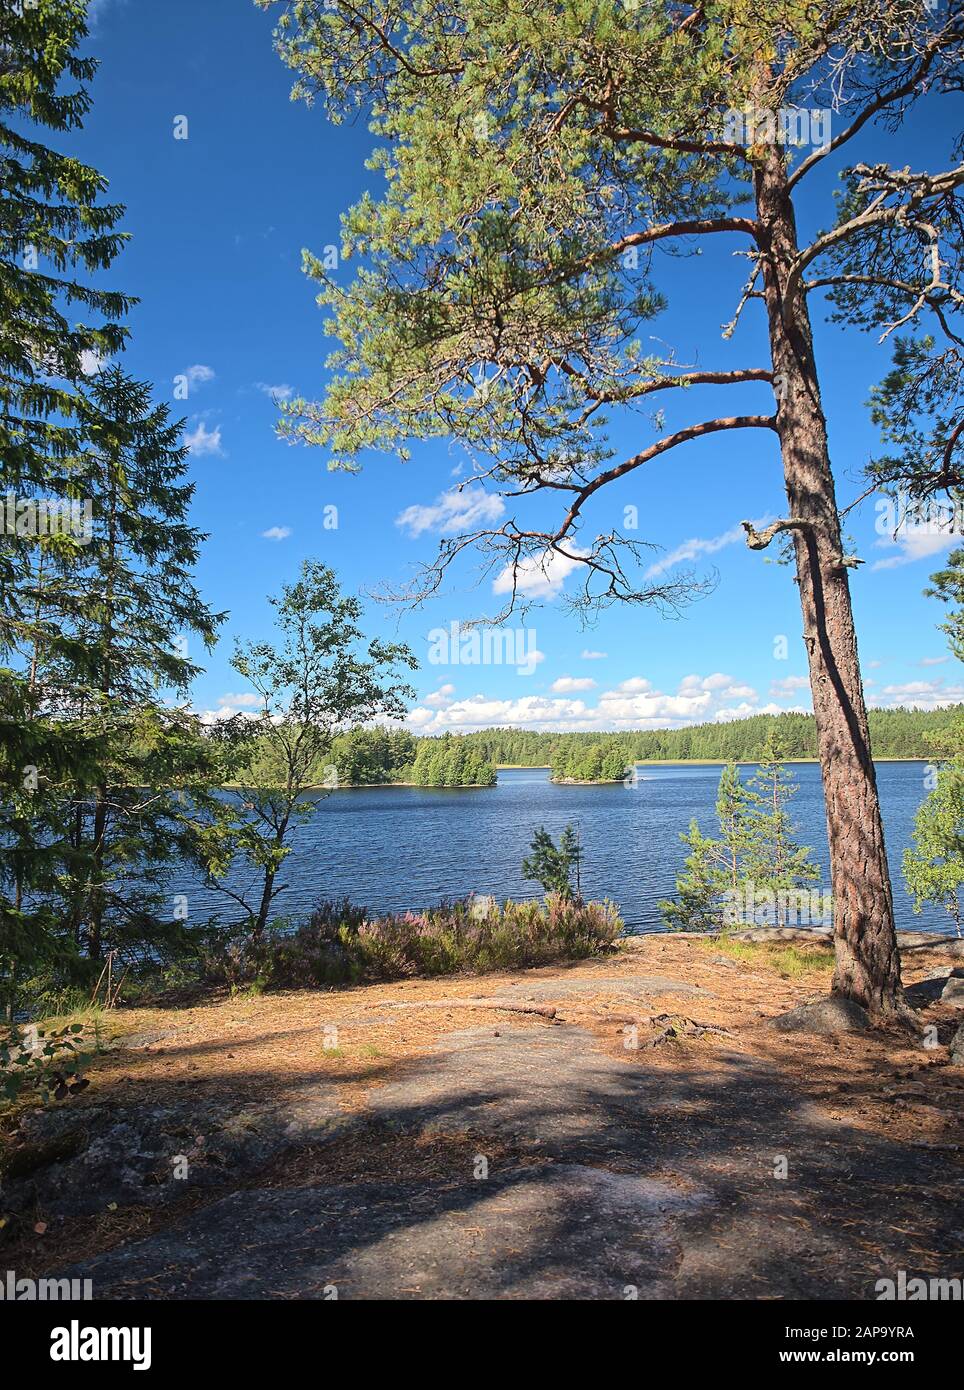 Idyllic Finnish summer lake scene at Teijo hiking trail in Salo, Finland. Big tree and the Matildajarvi lake on the background. Stock Photo